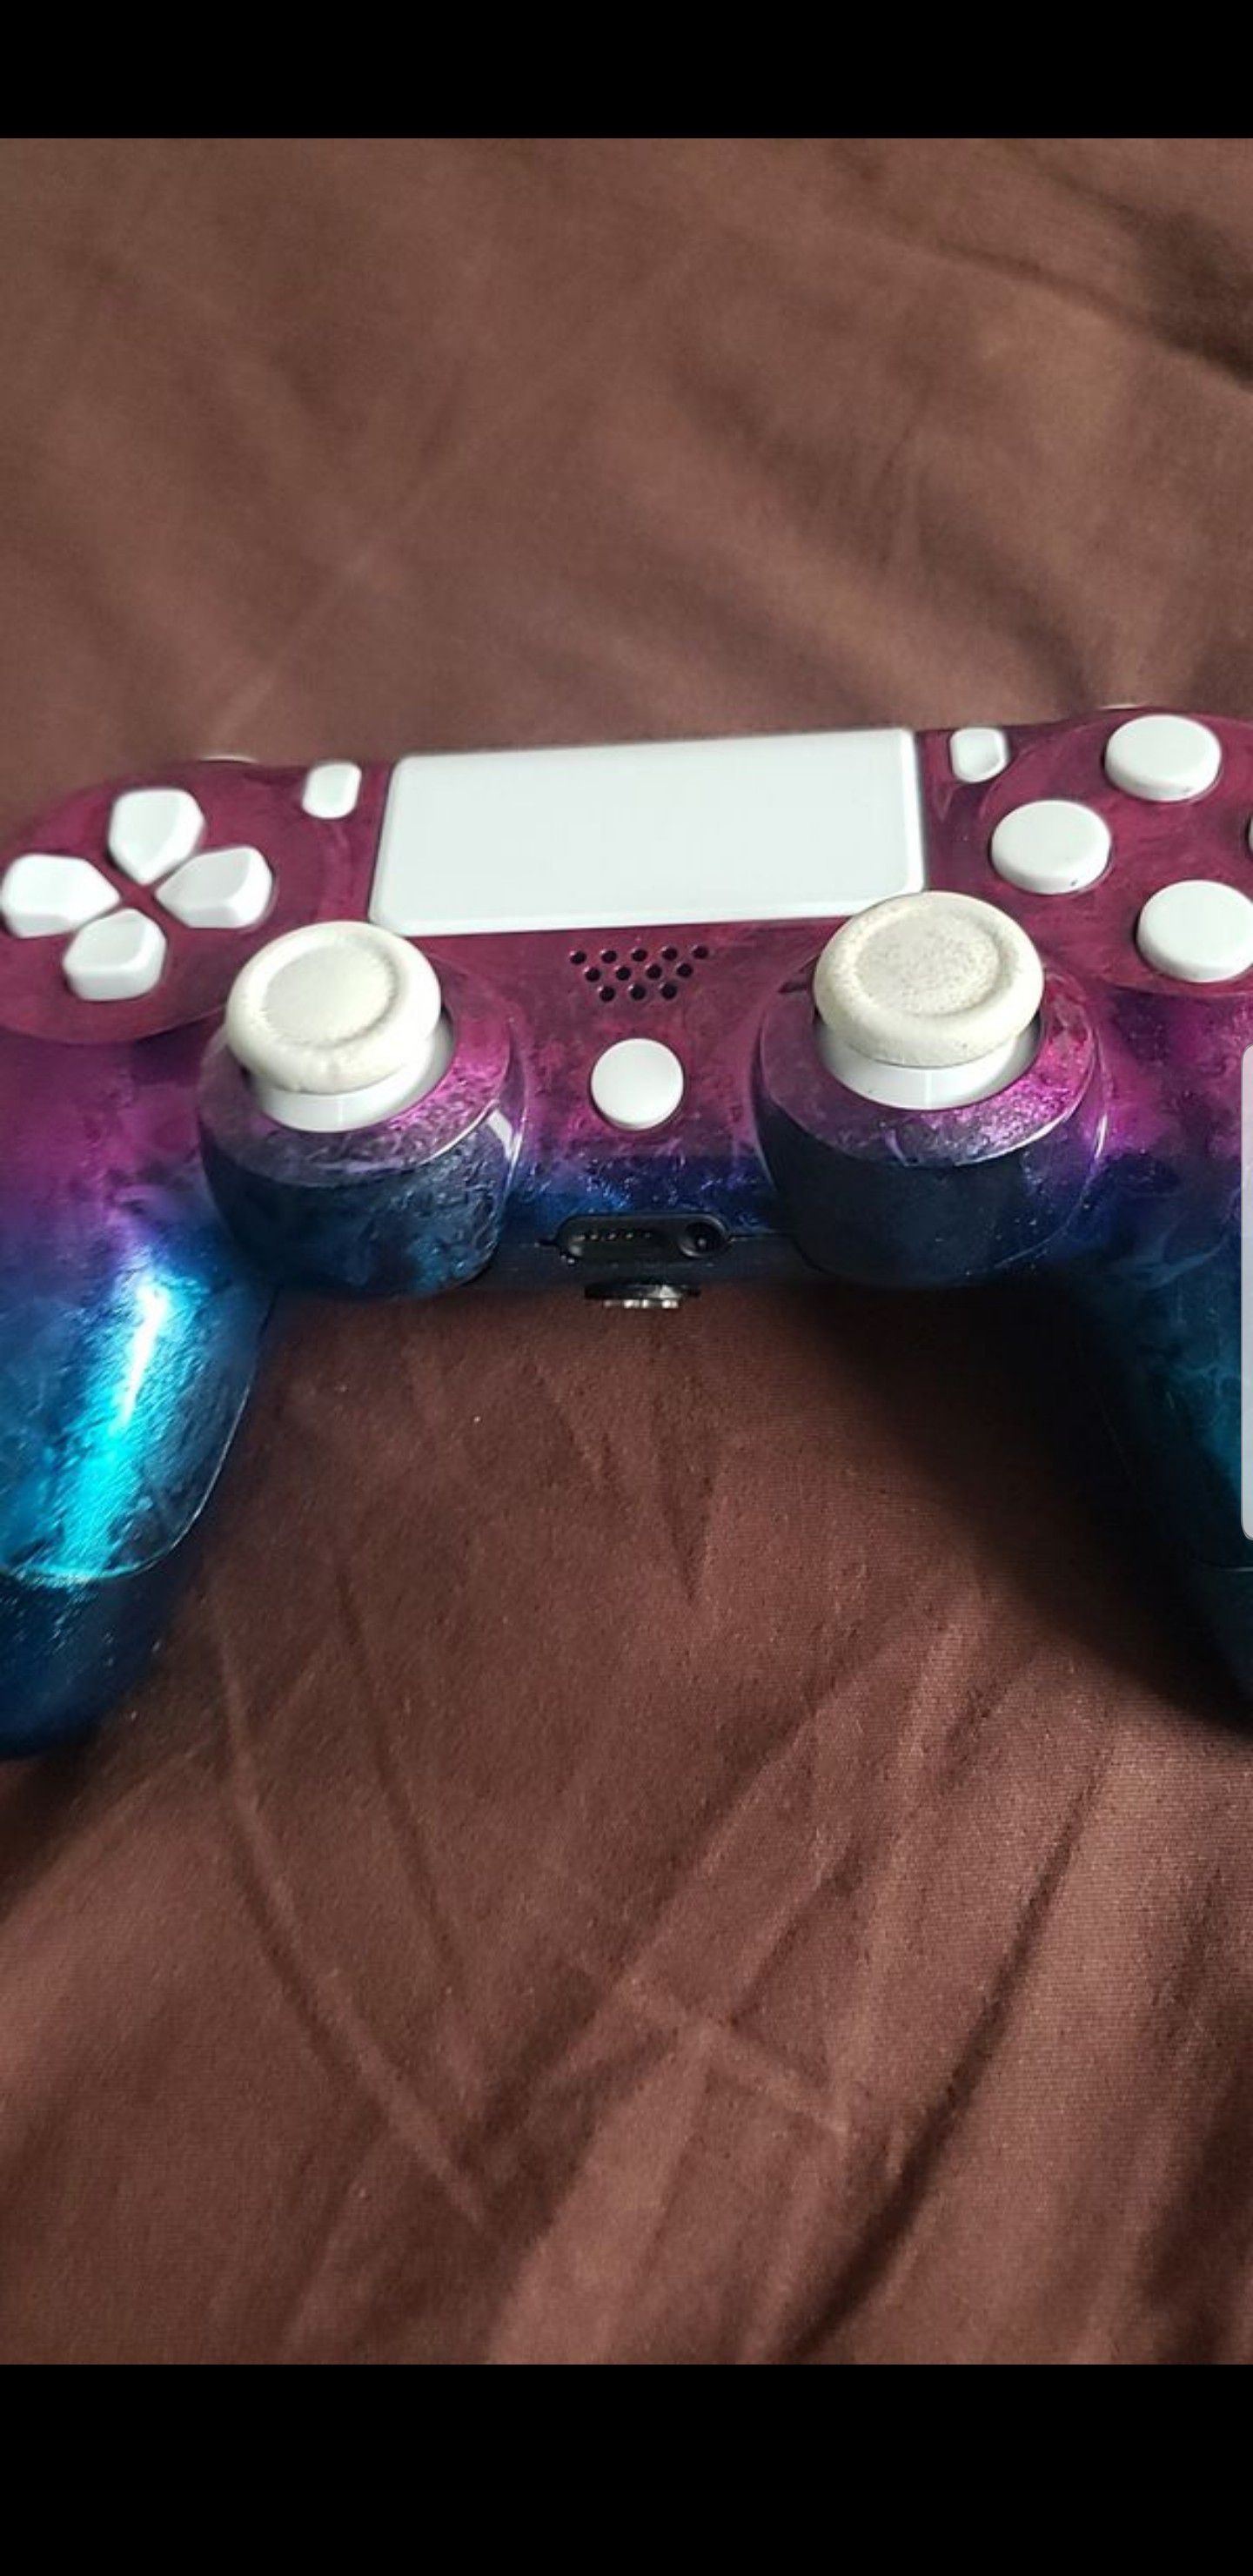 Ps4 modded controller